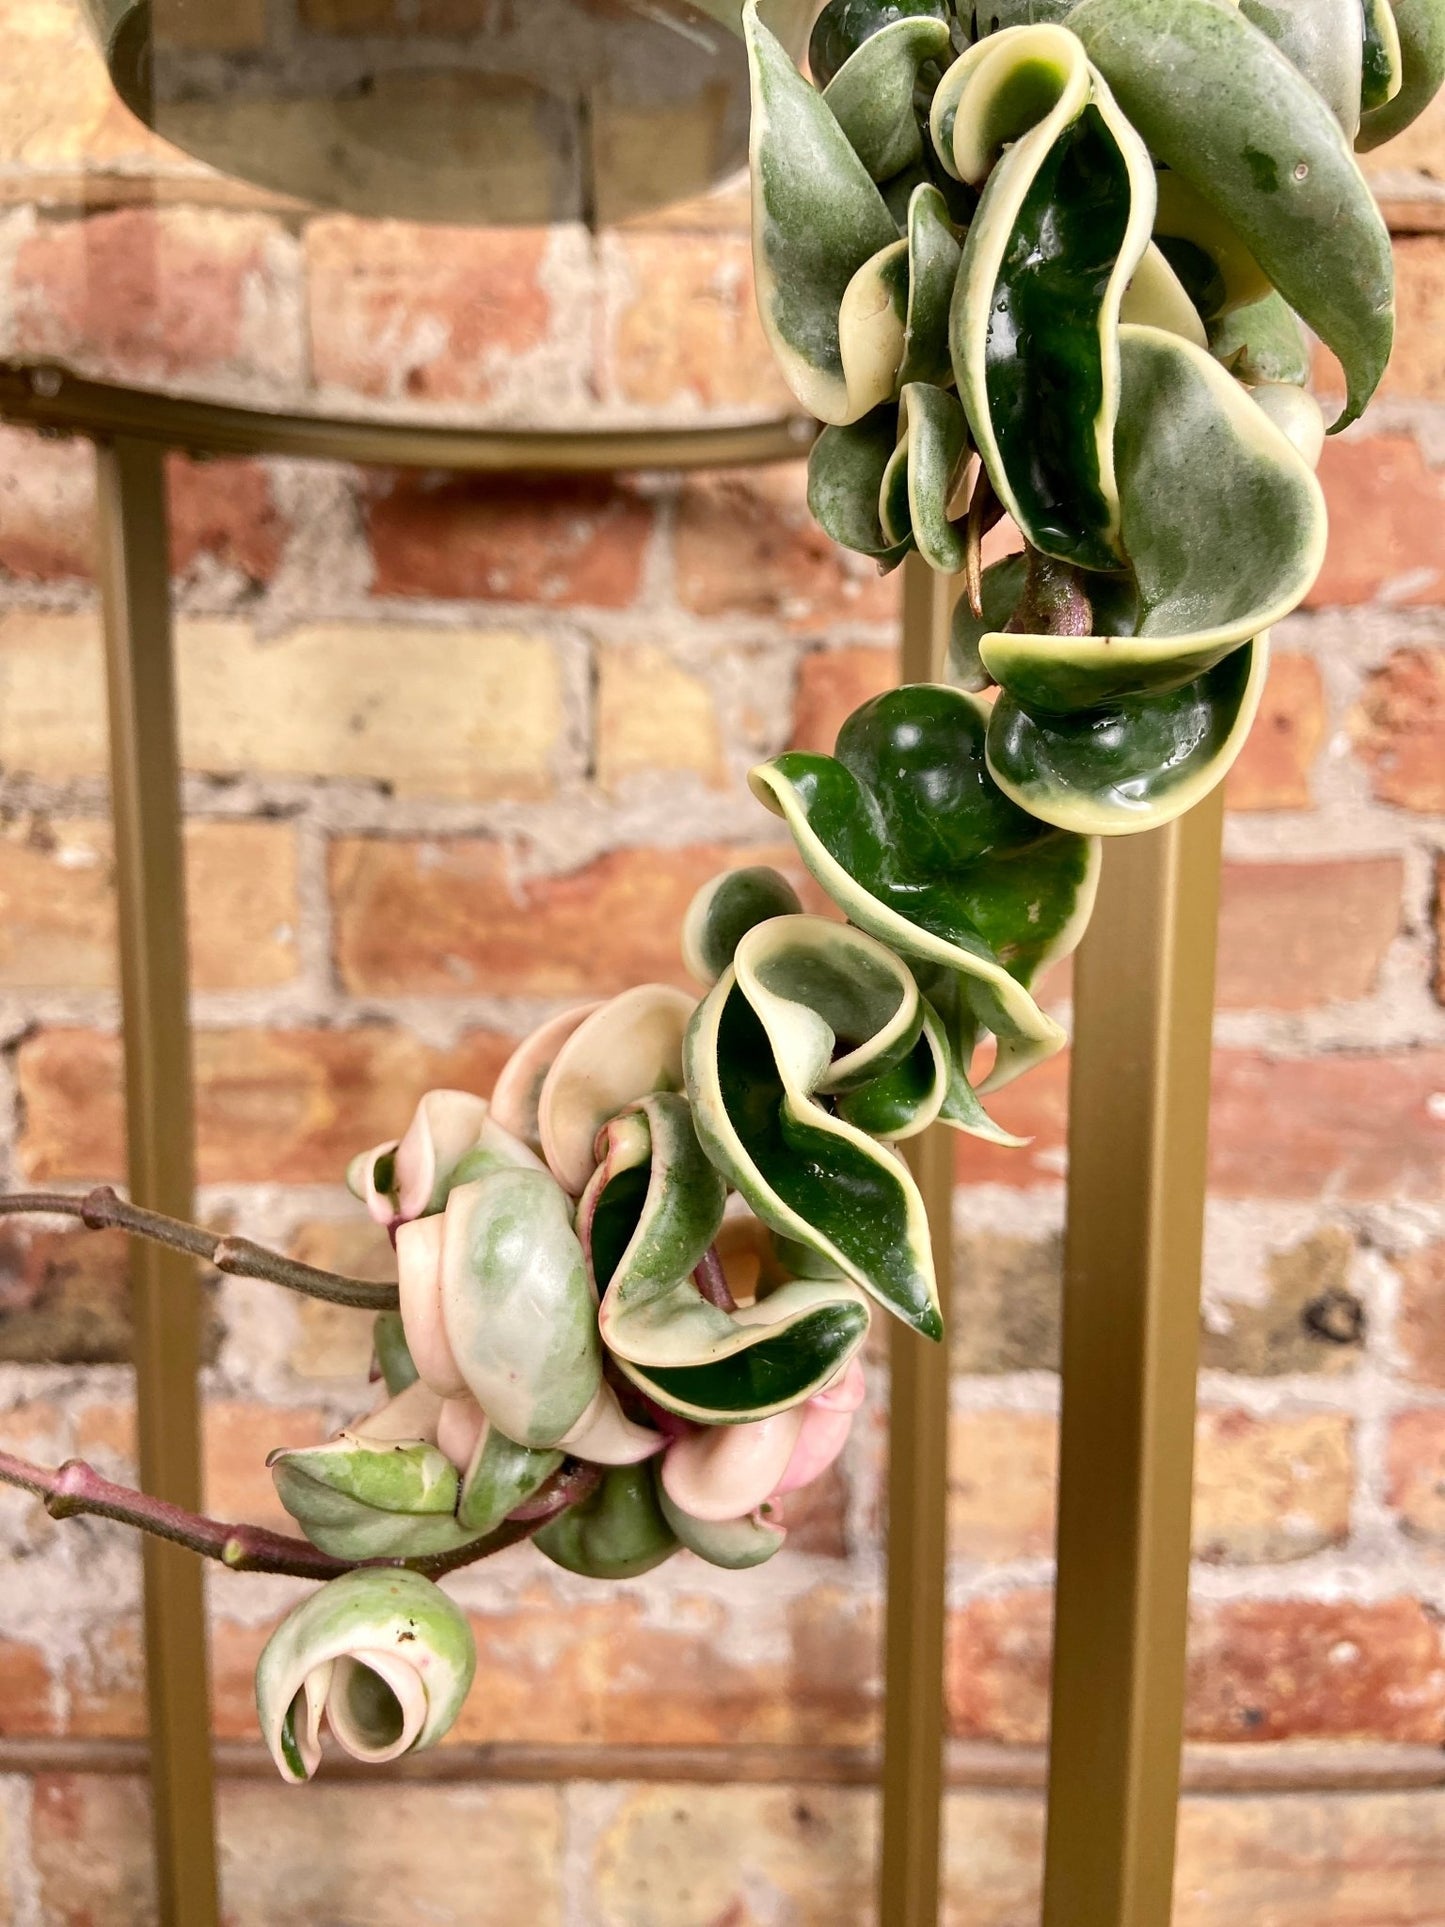 Hoya Compacta "Rope" Variegated - 8" - The Succulent City